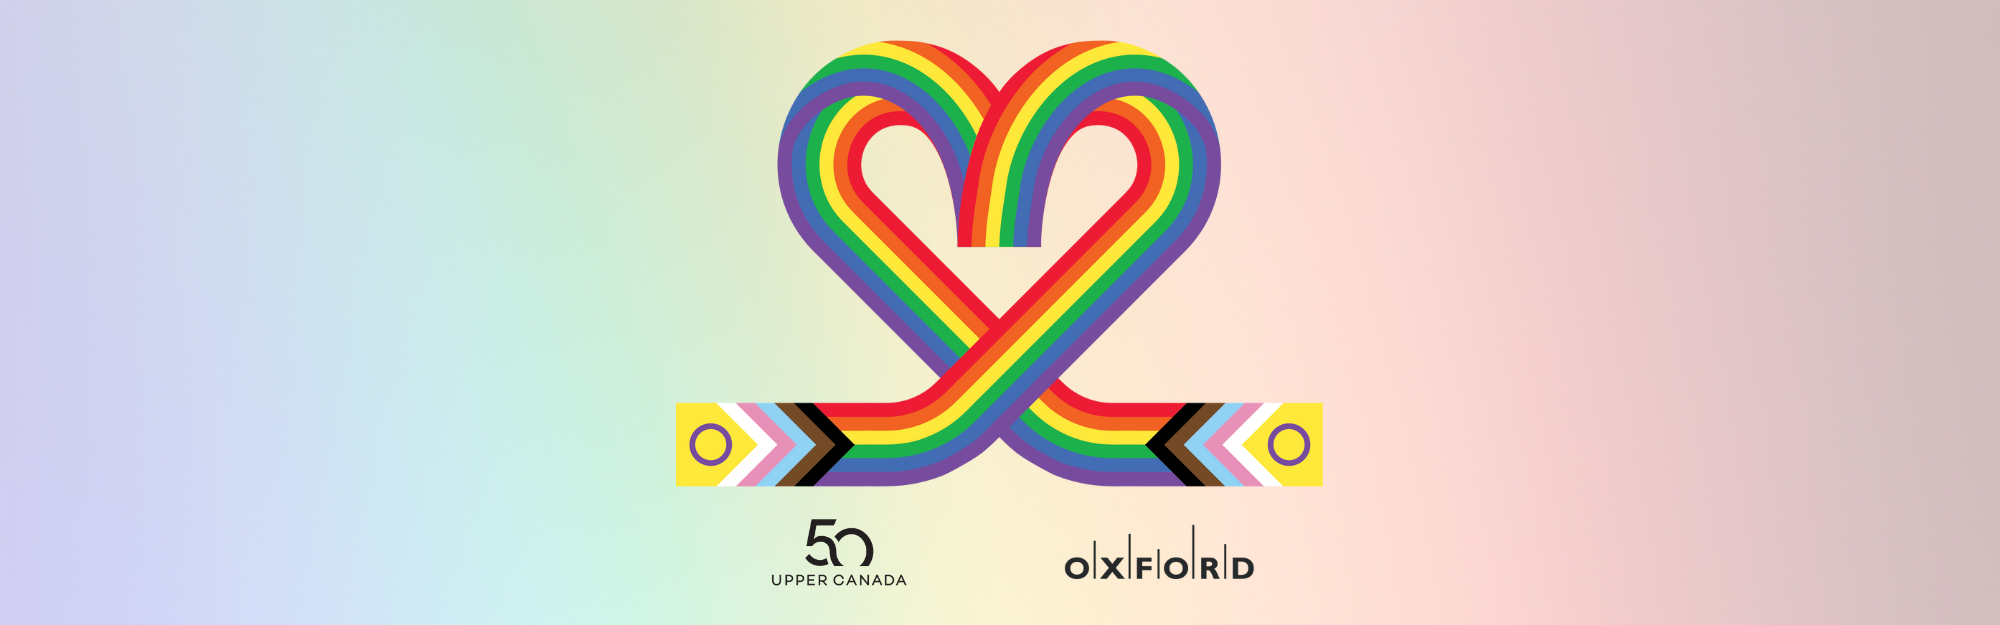 Upper Canada Mall & Oxford Properties Group Pride logo